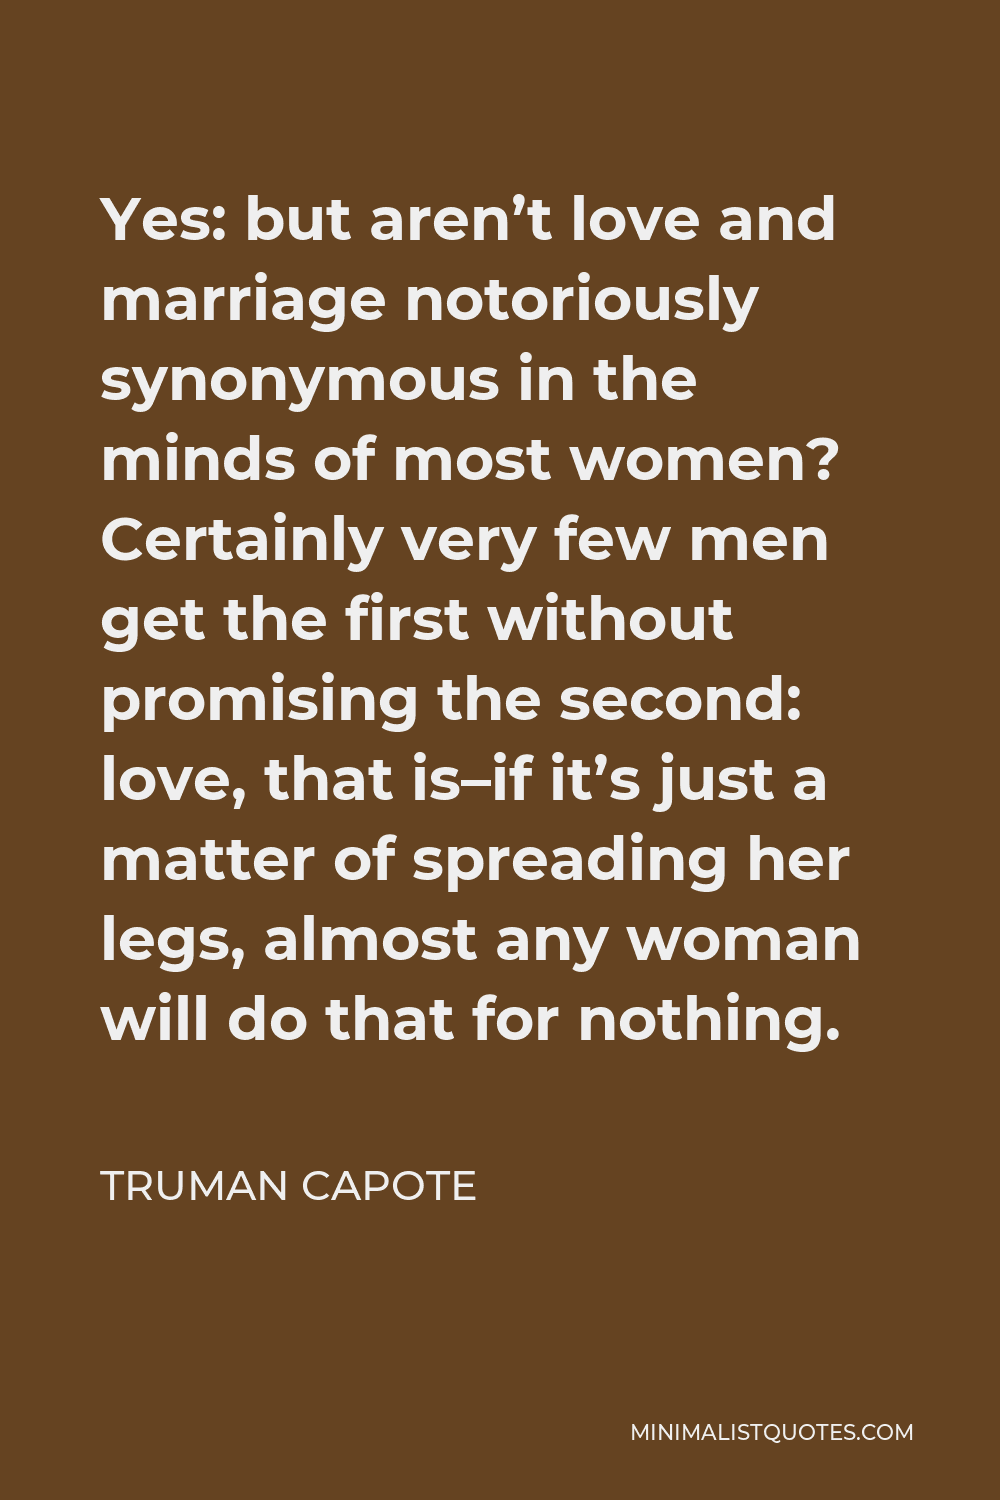 Truman Capote Quote - Yes: but aren’t love and marriage notoriously synonymous in the minds of most women? Certainly very few men get the first without promising the second: love, that is–if it’s just a matter of spreading her legs, almost any woman will do that for nothing.